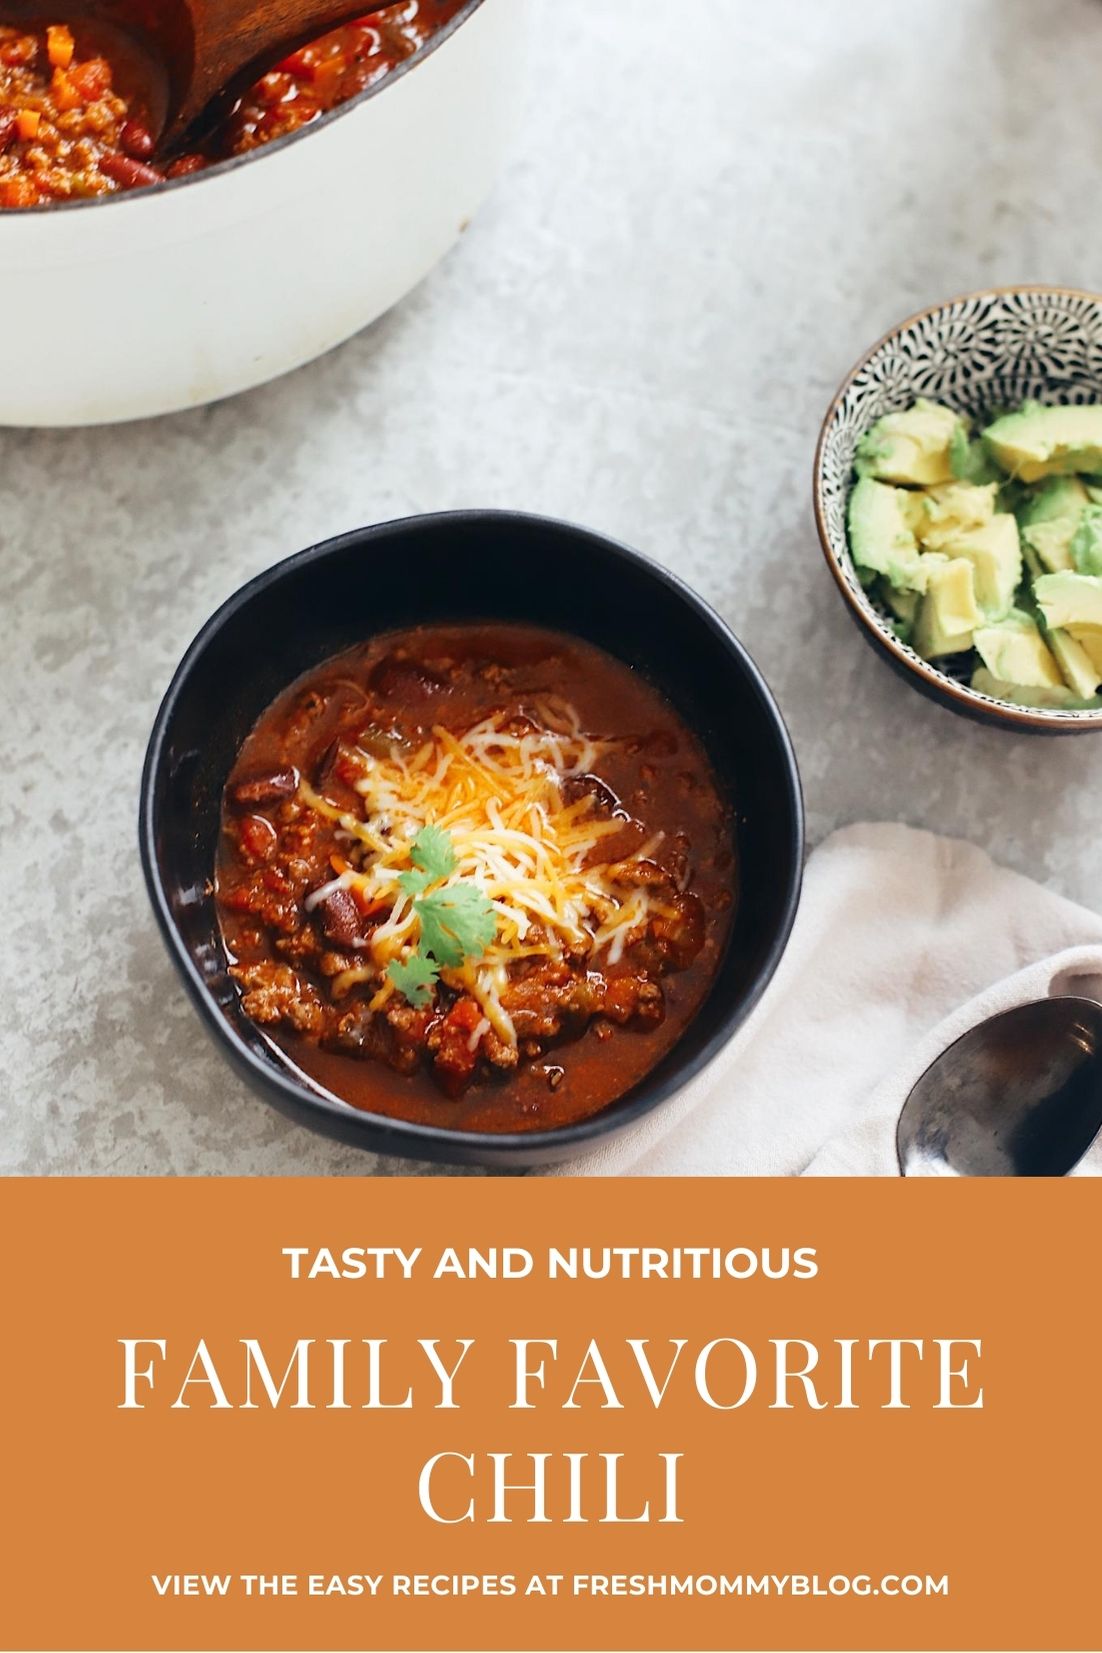 Easy Family Favorite Chili recipe! Make this delicious classic homemade chili in the crockpot or in one pot easily. It's THE BEST CHILI, and my family asks me to make it over and over. | Chili Recipe by popular Florida lifestyle blog, Fresh Mommy Blog: Pinterest image of chili in a black ceramic bowl with shredded cheese on top. 